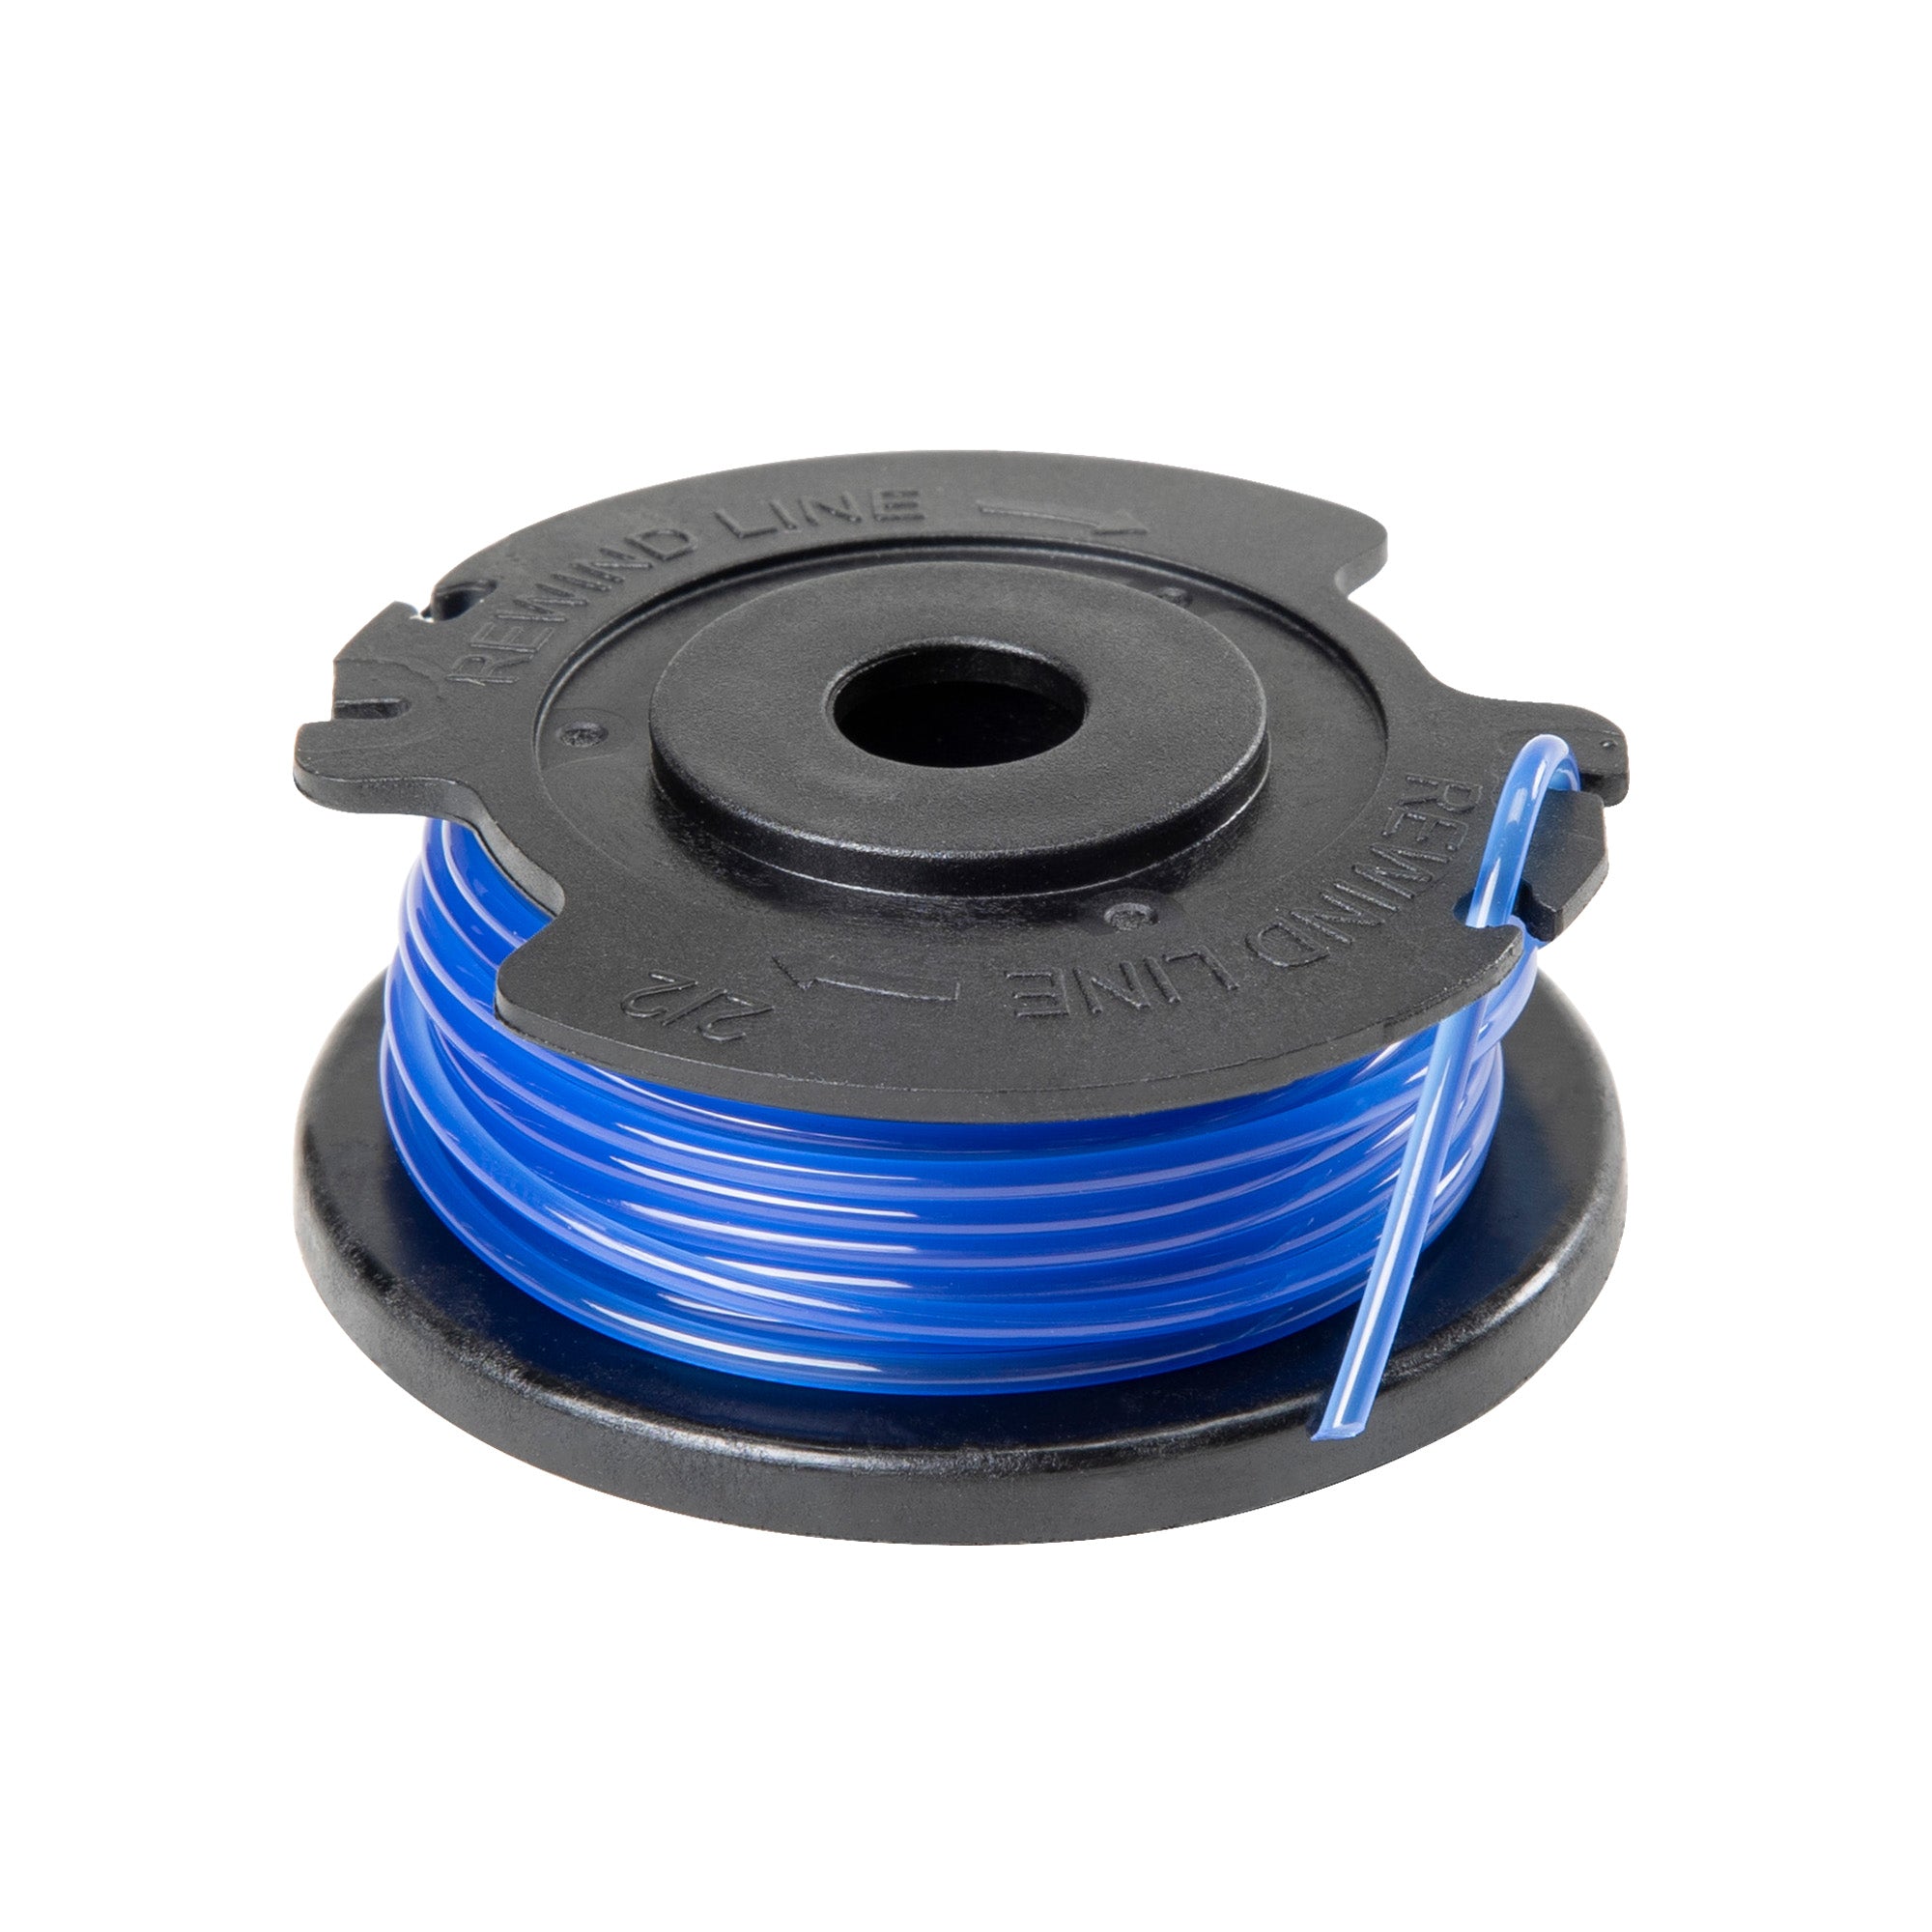 Replacement Automatic Trimmer Spool, Single-Line .065 Inch - LawnMaster